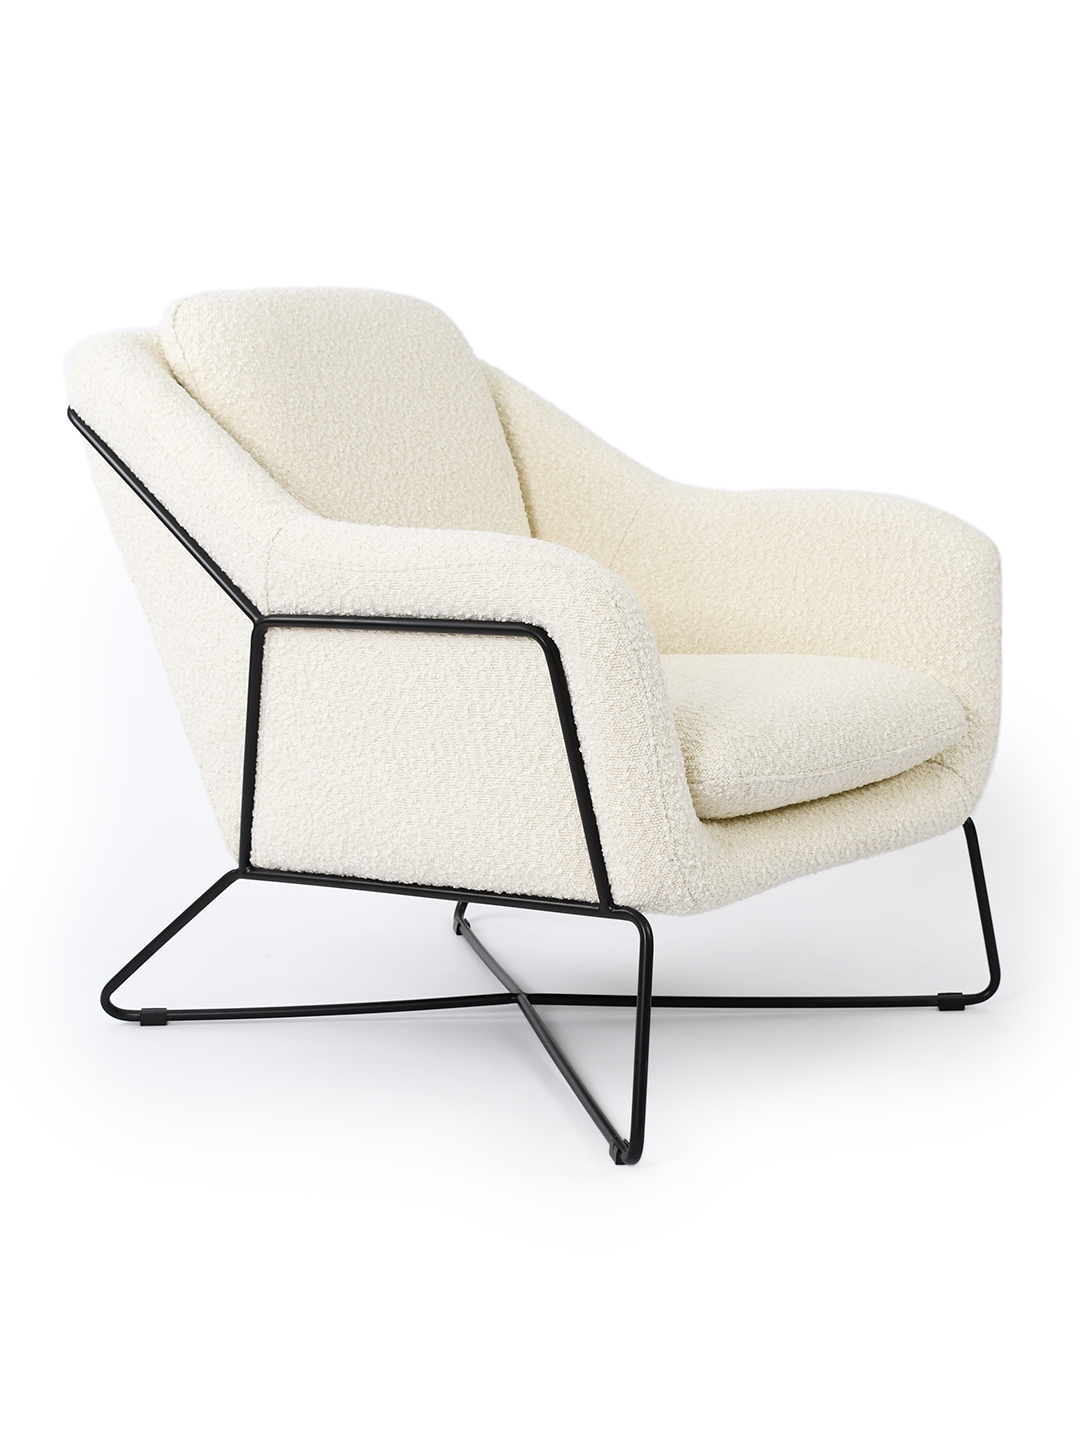 Charlie Occasional Chair in Ivory boucle fabric with matte black powder-coated metal frame.